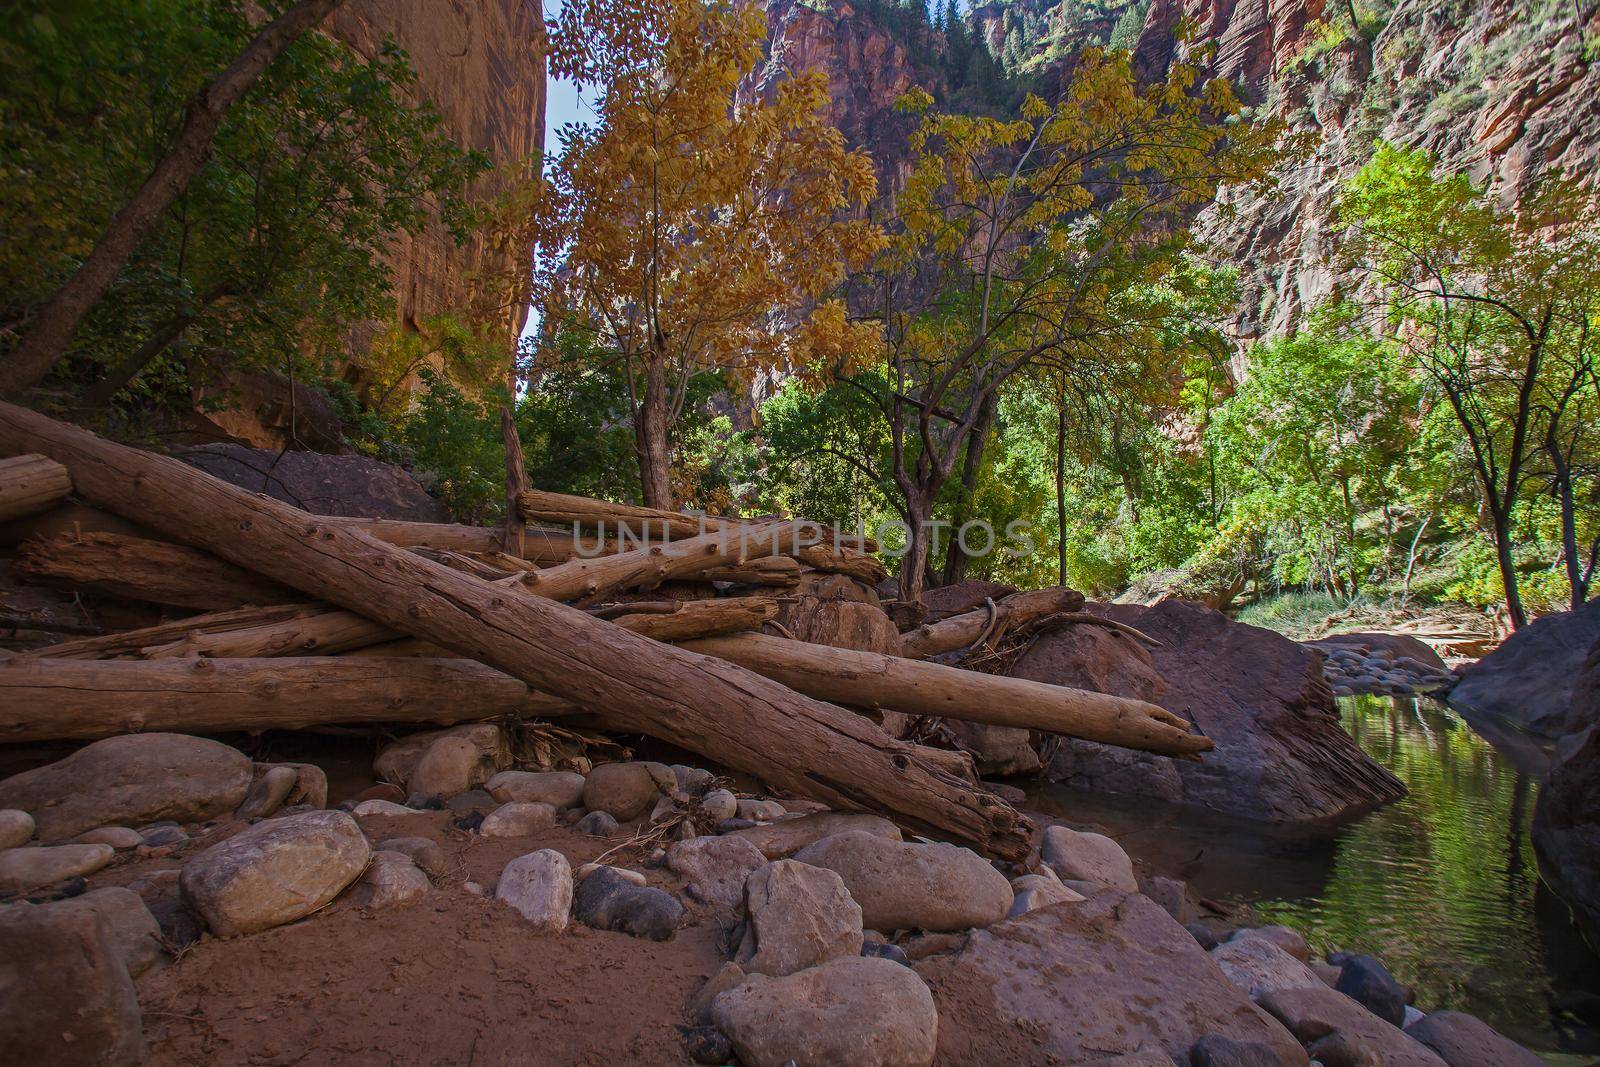 Driftwood from a previous flood lays high up on the bank of the Virgin River in Zion National Park. Utah